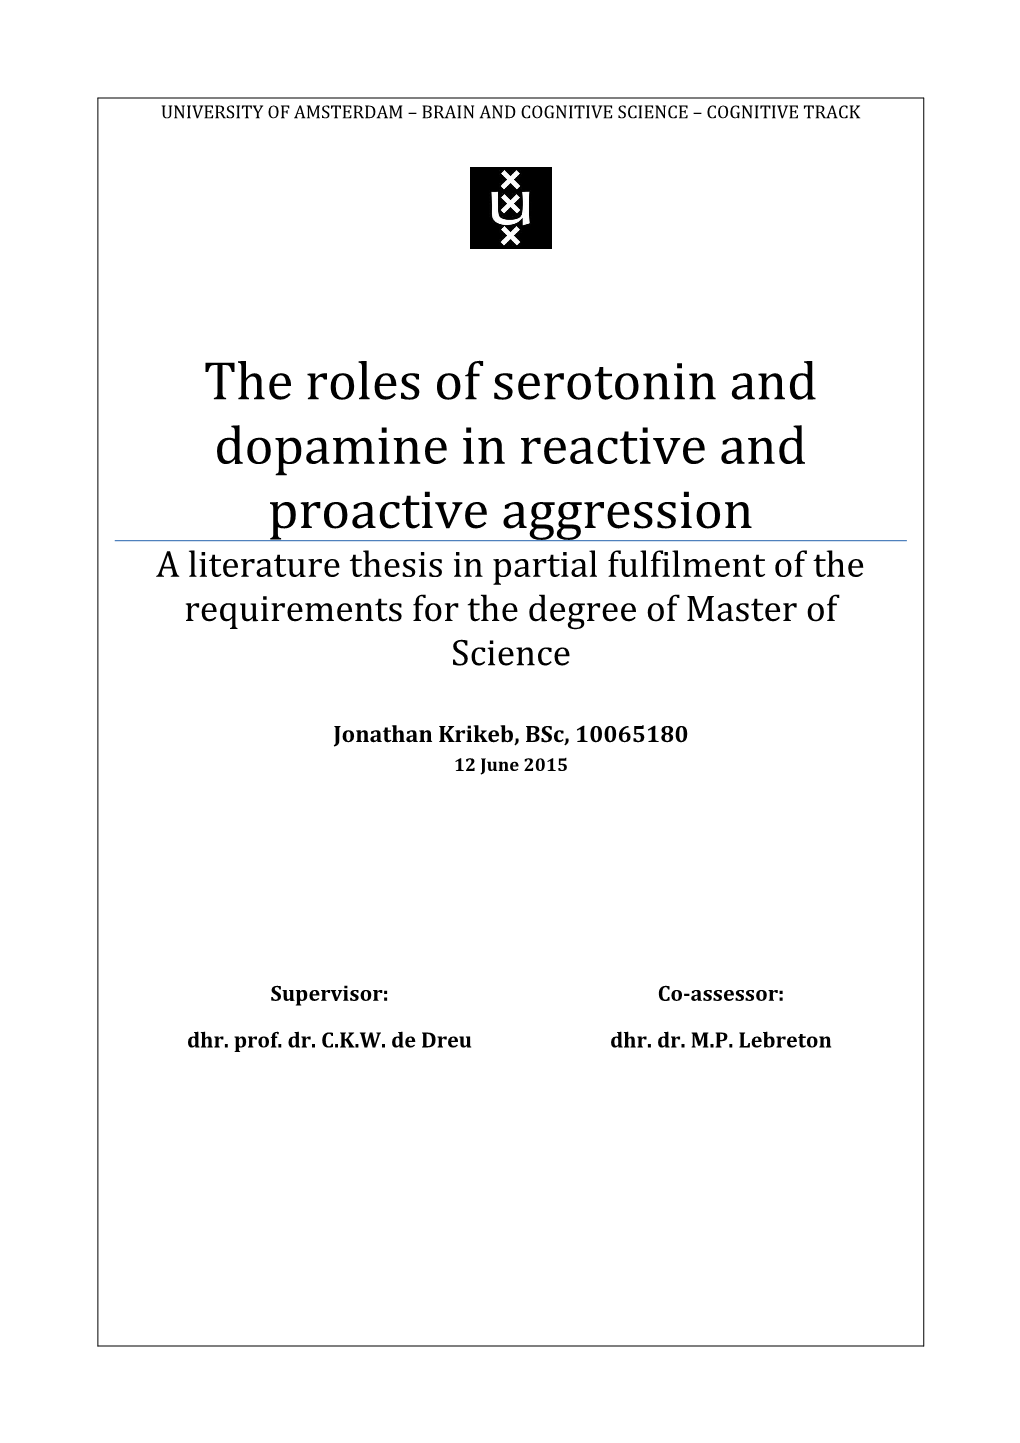 The Roles of Serotonin and Dopamine in Reactive and Proactive Aggression